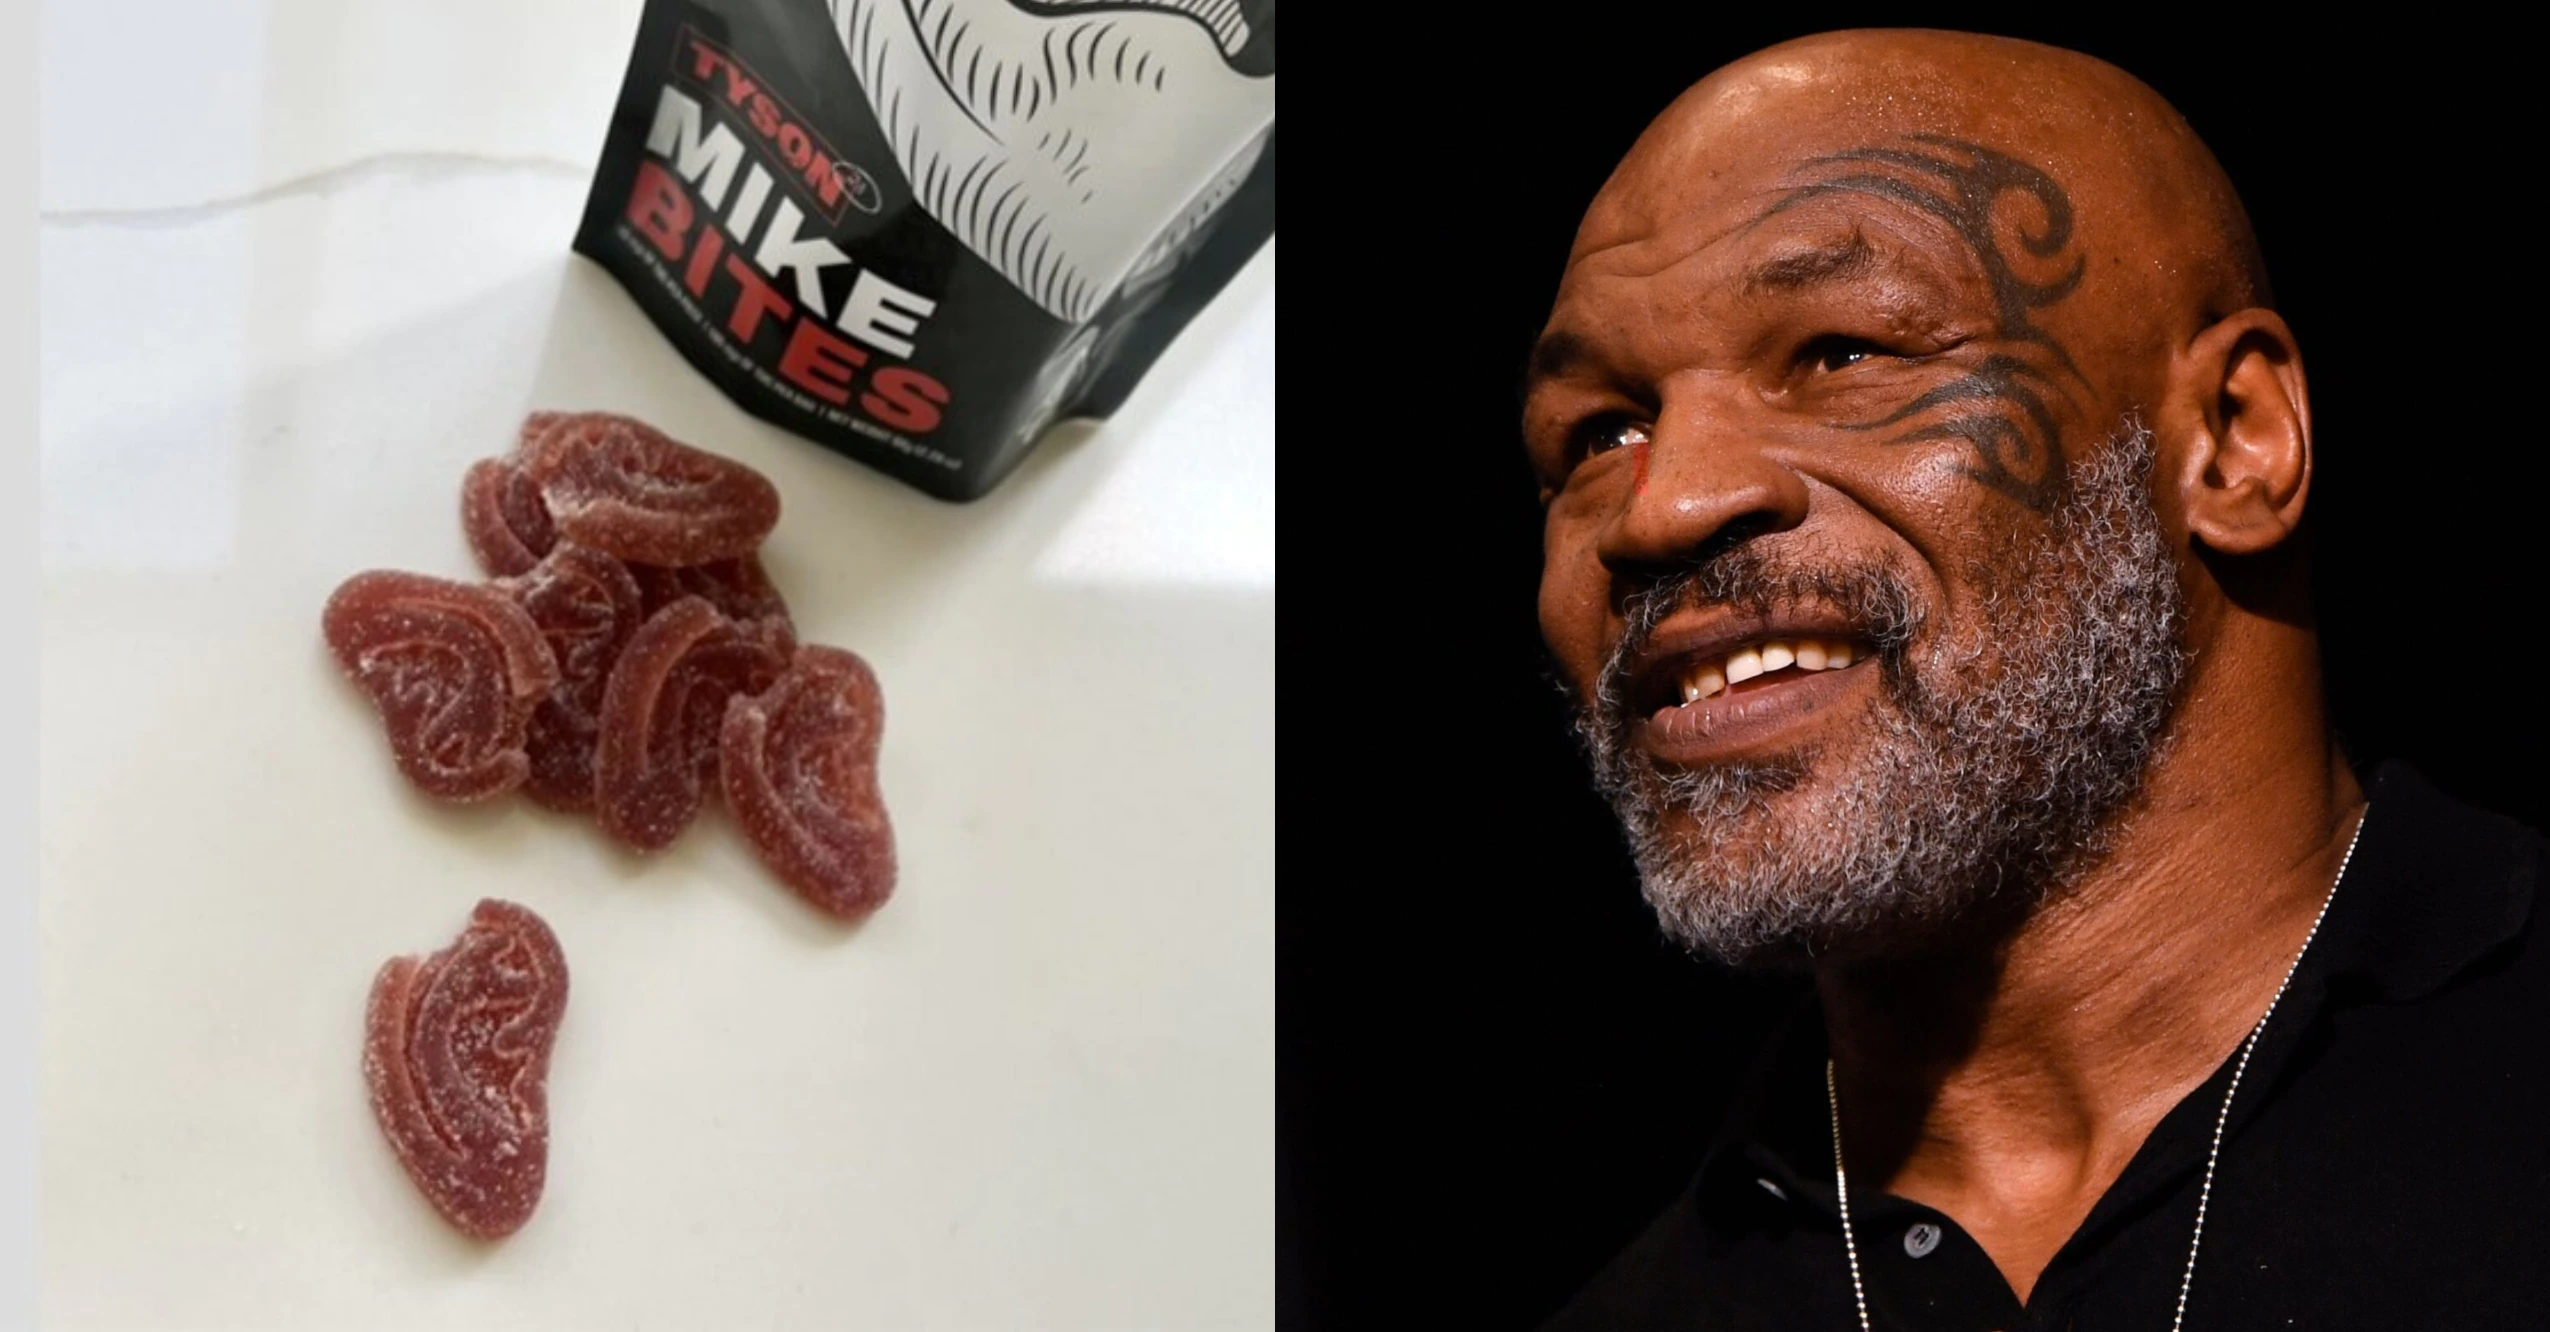 Mike Tyson’s Cannabis Company Is Selling Ear-Shaped Weed Gummies Called ‘Mike Bites’